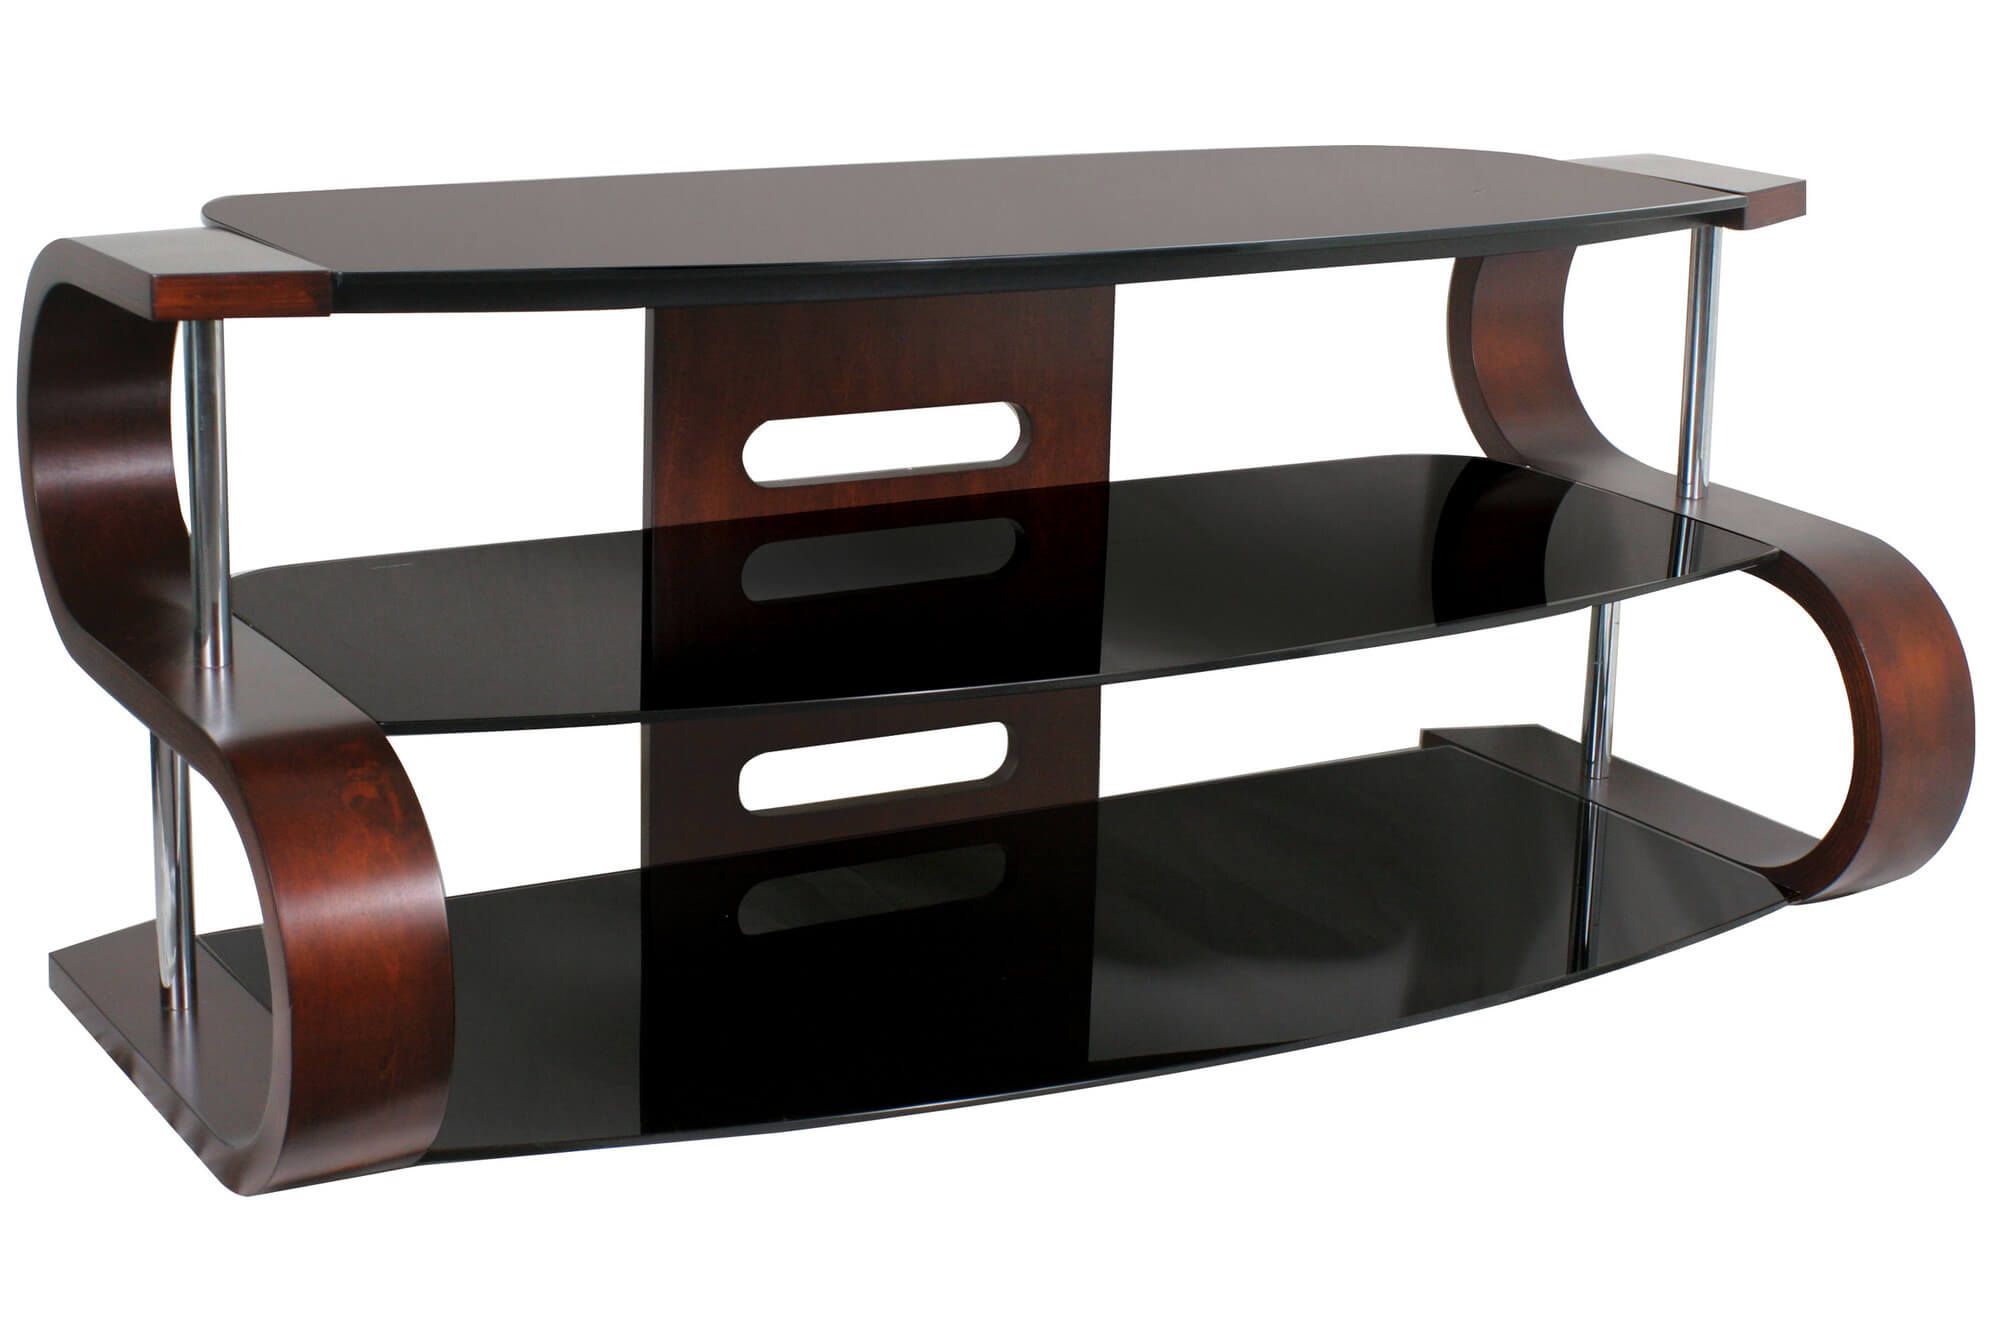 16 Types Of Tv Stands (comprehensive Buying Guide) Inside Contemporary Wood Tv Stands (View 12 of 15)